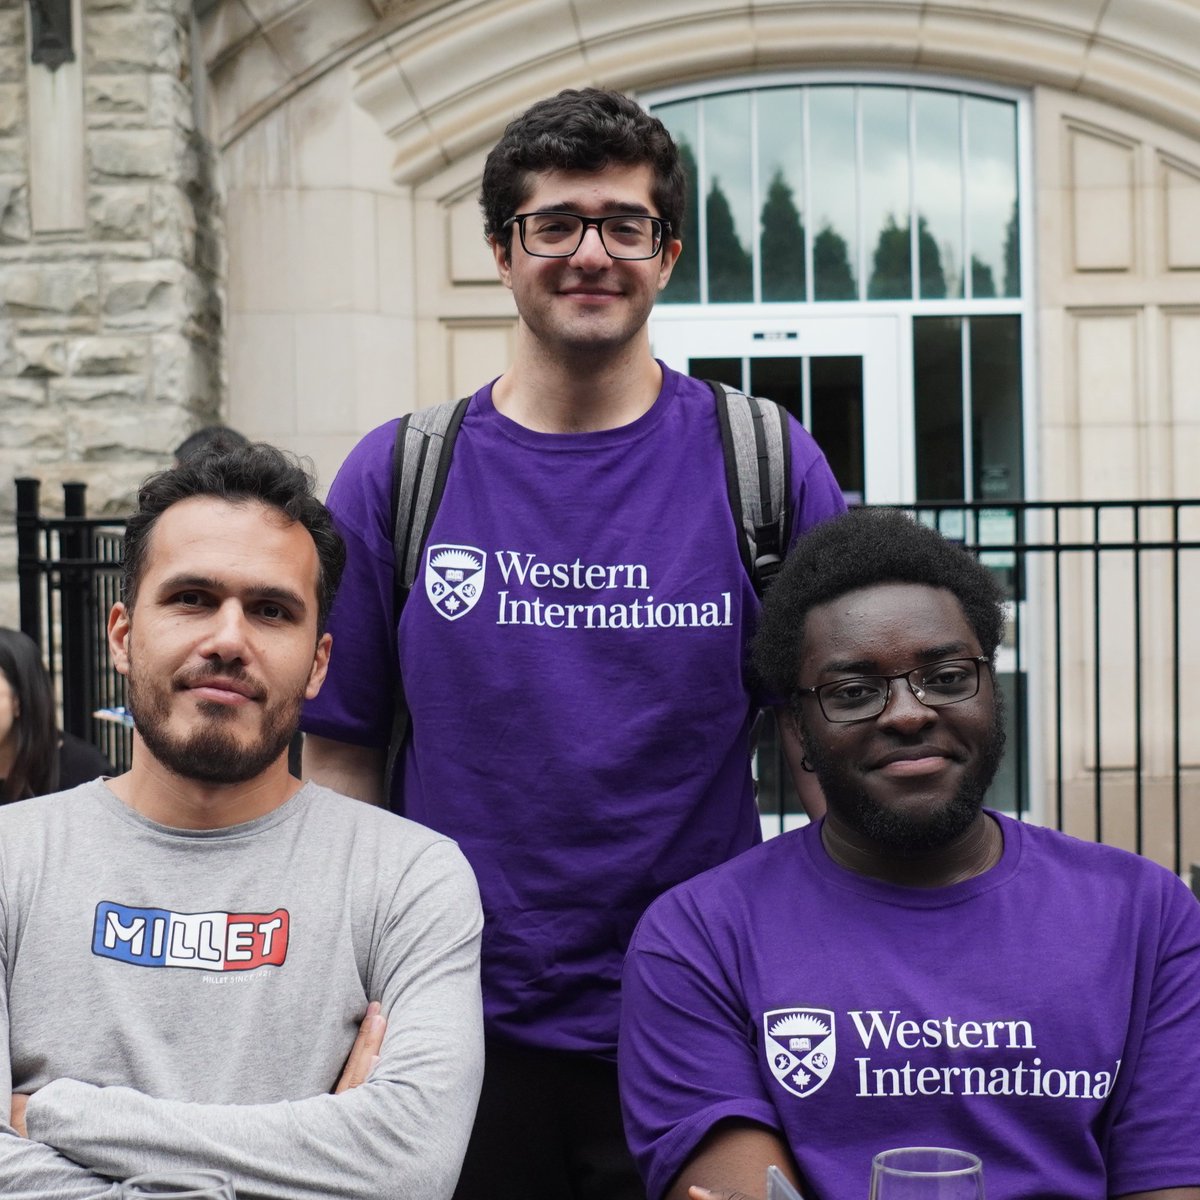 Thanks to everyone who joined at the New Student Celebration! We hope you had a great time enjoying meals and connecting with fellow #WesternU students. Check the website and schedule for our programs, services and activities: iesc.uwo.ca/new_students/o…. @westernU @westernsogs